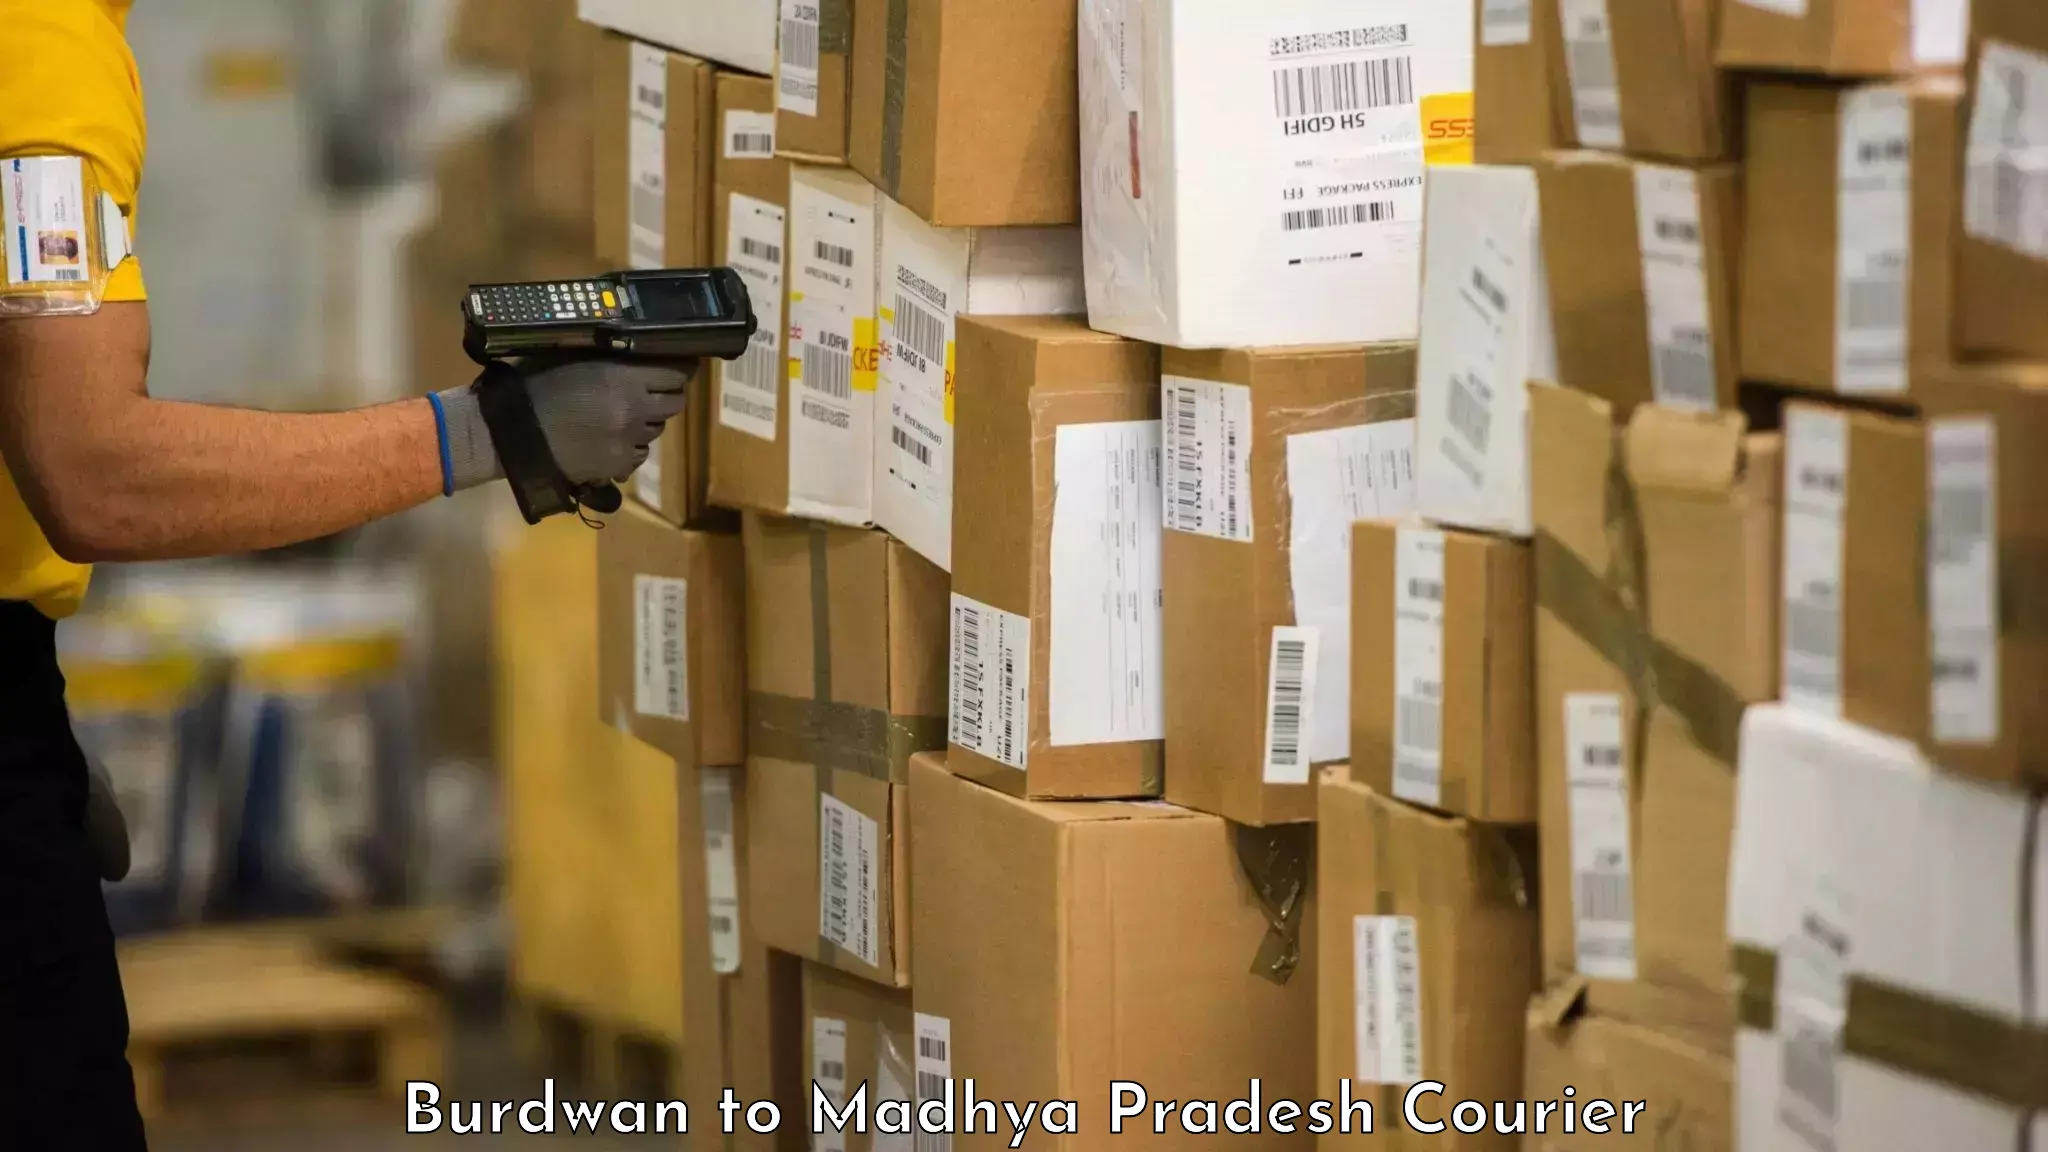 Baggage relocation service Burdwan to Madwas